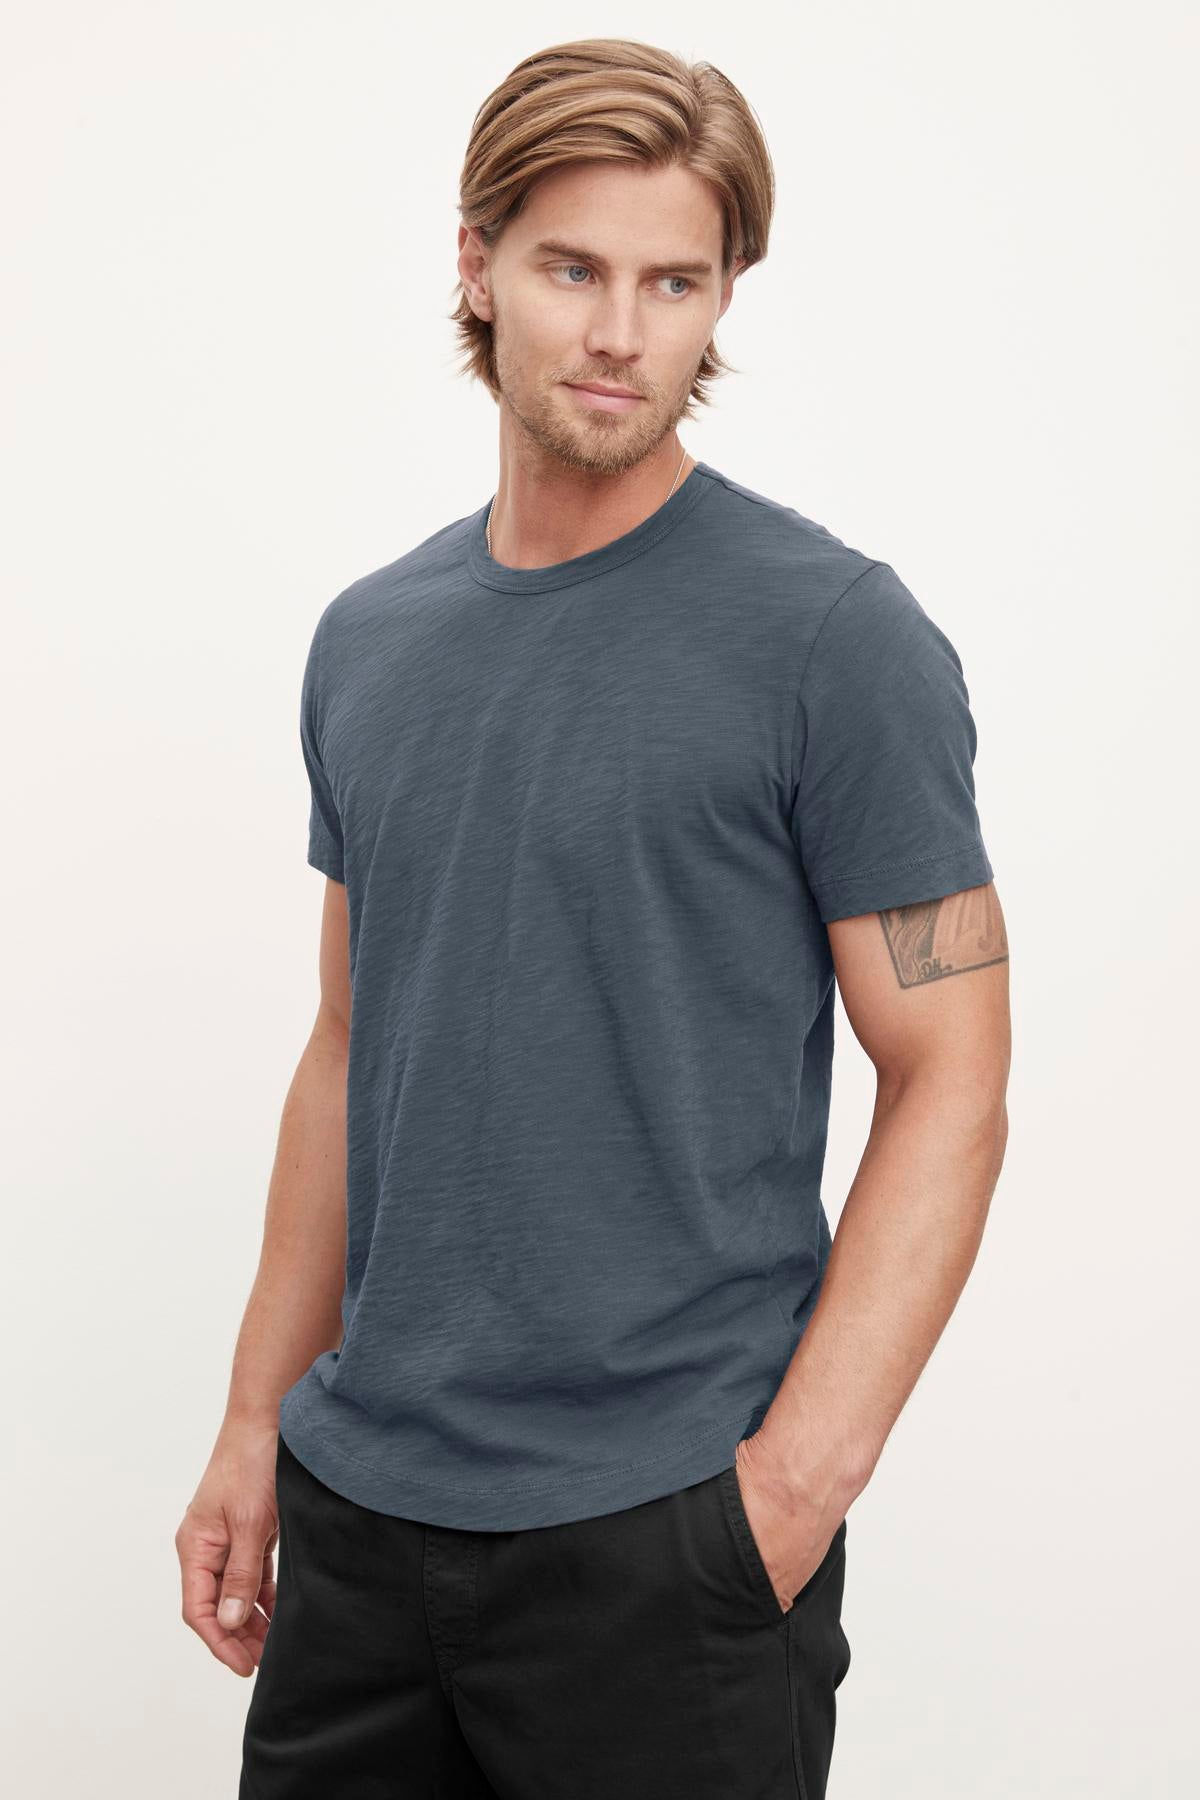 A man with medium-length hair wearing a blue Velvet by Graham & Spencer AMARO TEE and black pants stands with his left hand in his pocket, looking to his right, exuding a relaxed stylish feel.-37386214408385